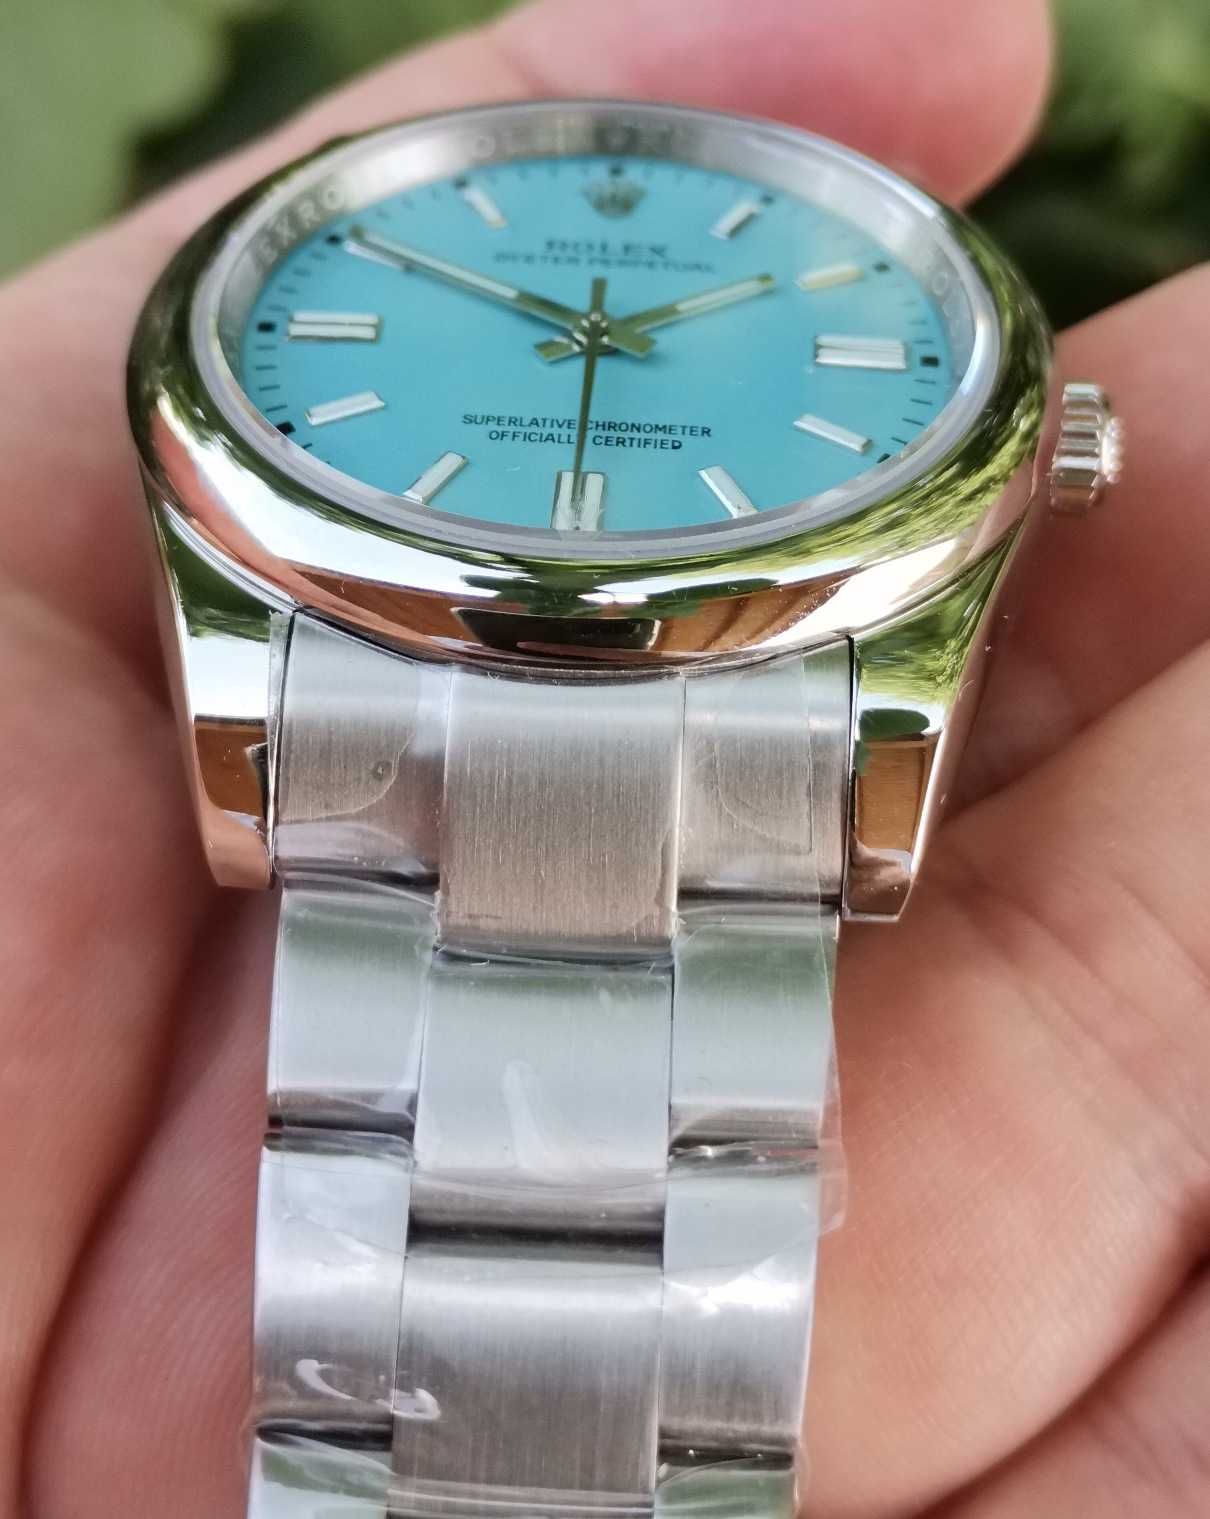 Rolex Oyster Perpetual 40 mm Automatic japonez Miyota 8215 Safir